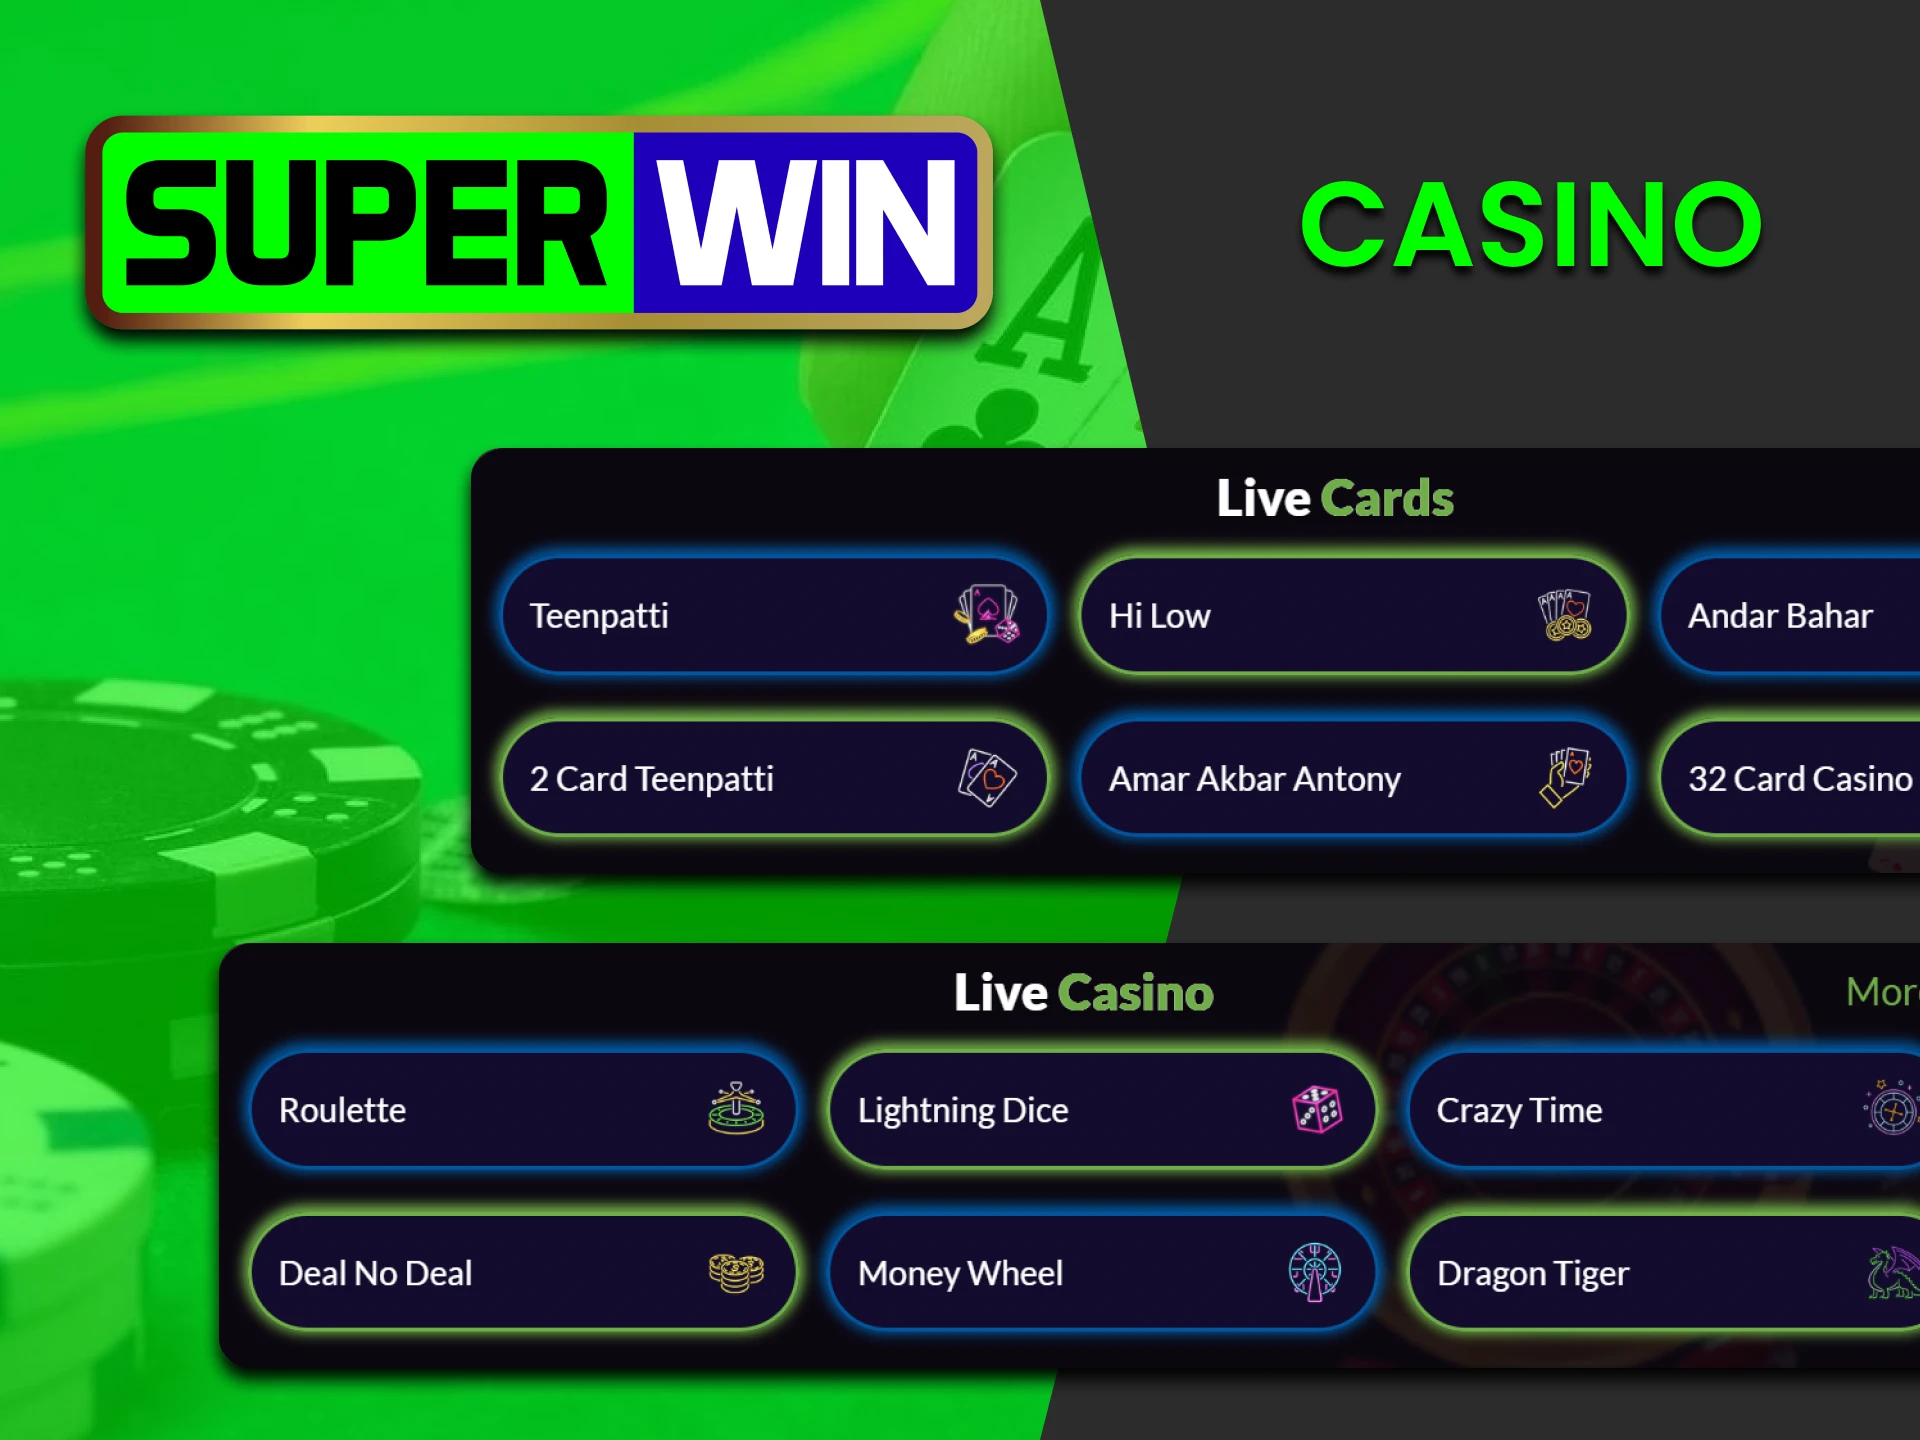 Choose casino games from Superwin.